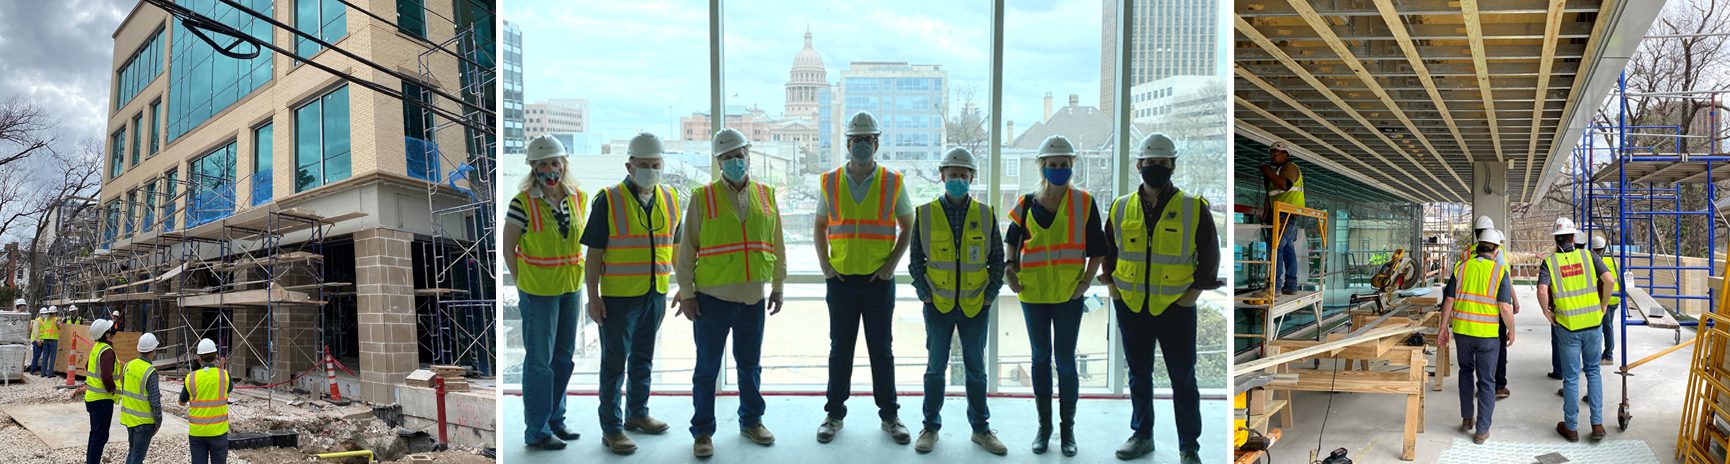 Site Tour of the Texas Association of Counties Building